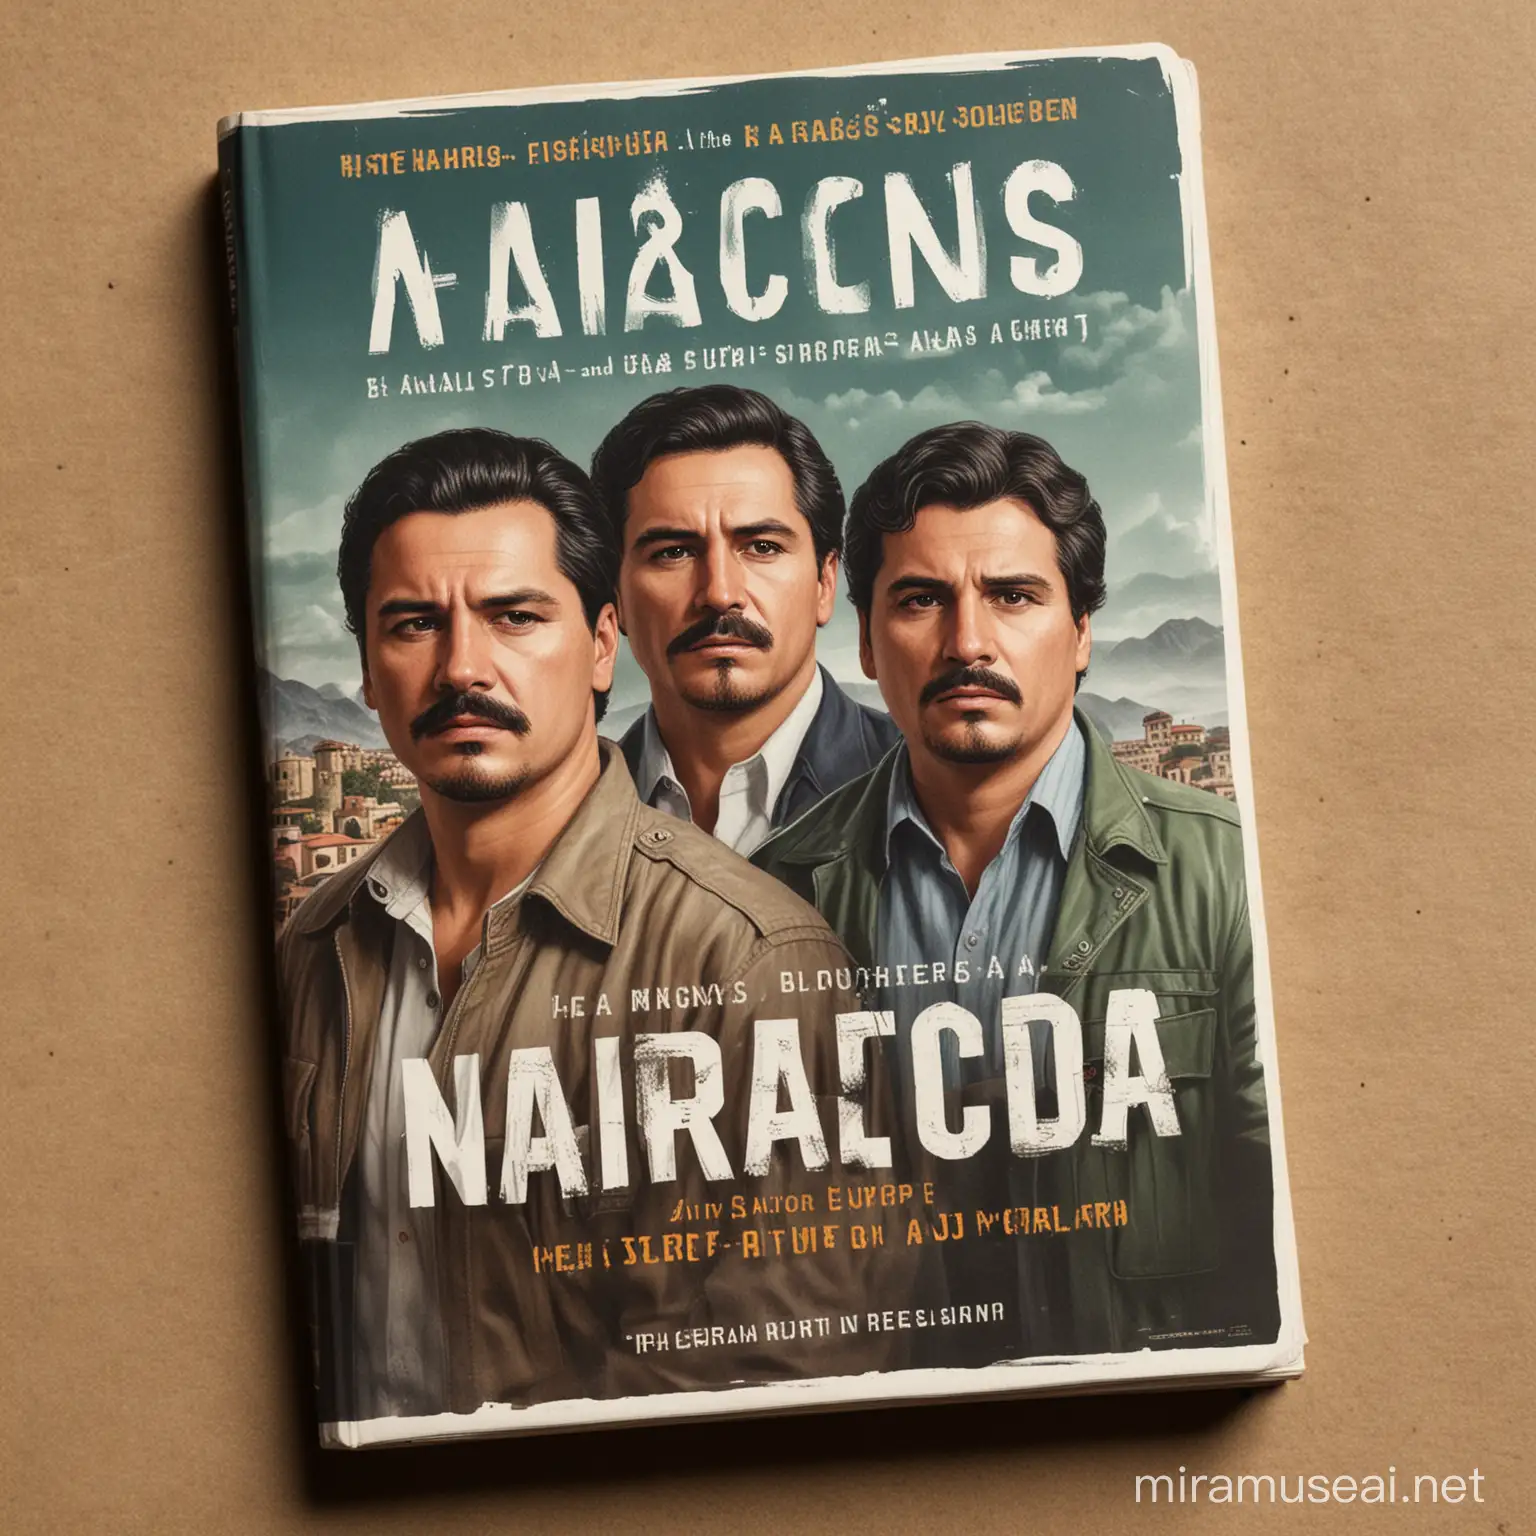 Book Cover for a story about narcos in all europe. The story have two brothers and a DEA agent.
